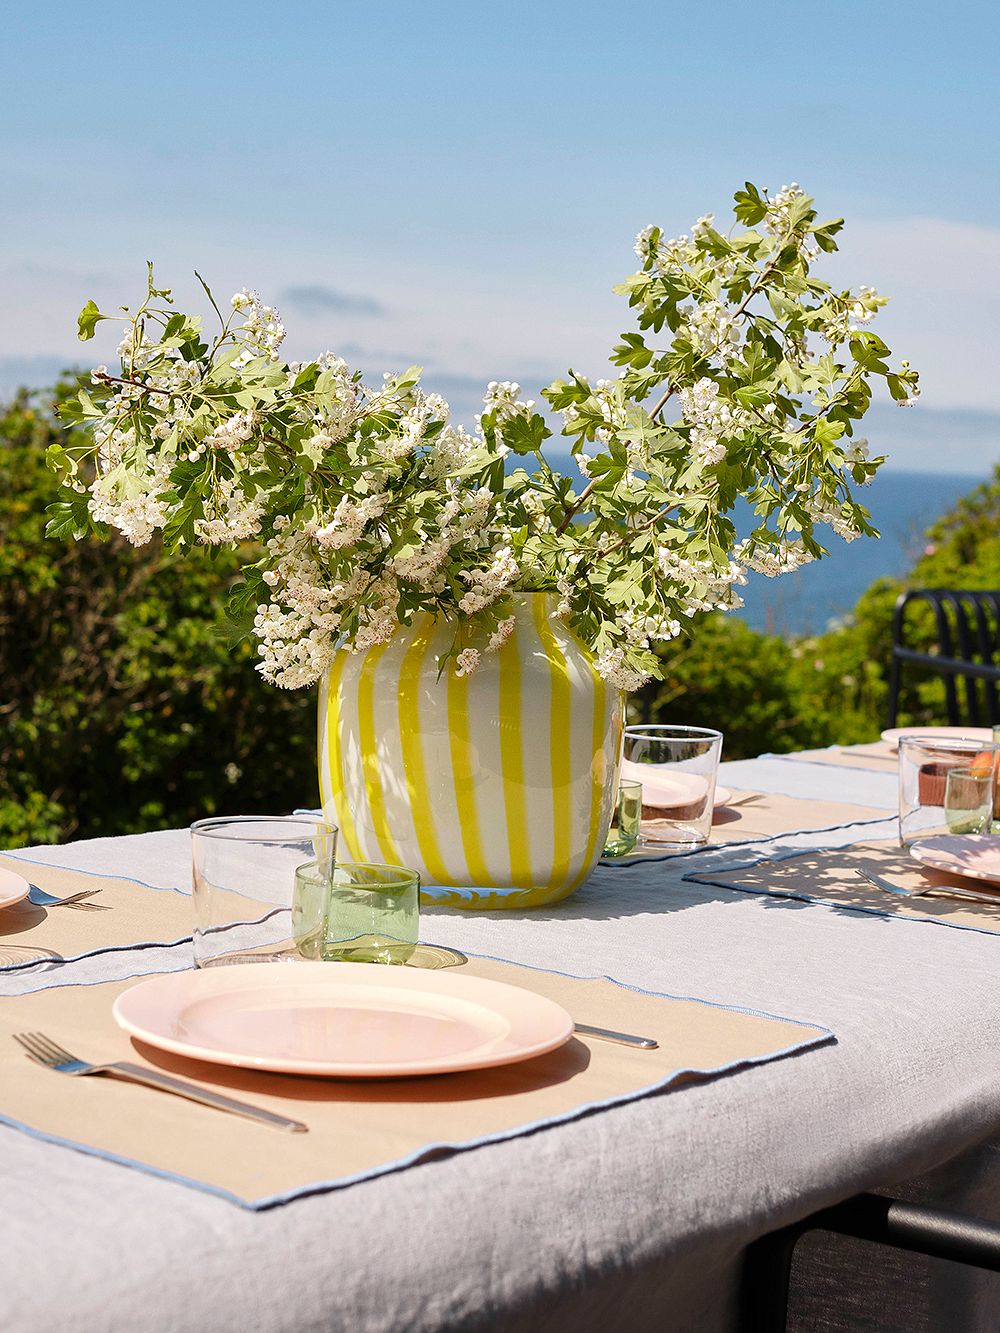 An image of HAY's yellow Juice vase in a table setting, as part of the summer house decor.